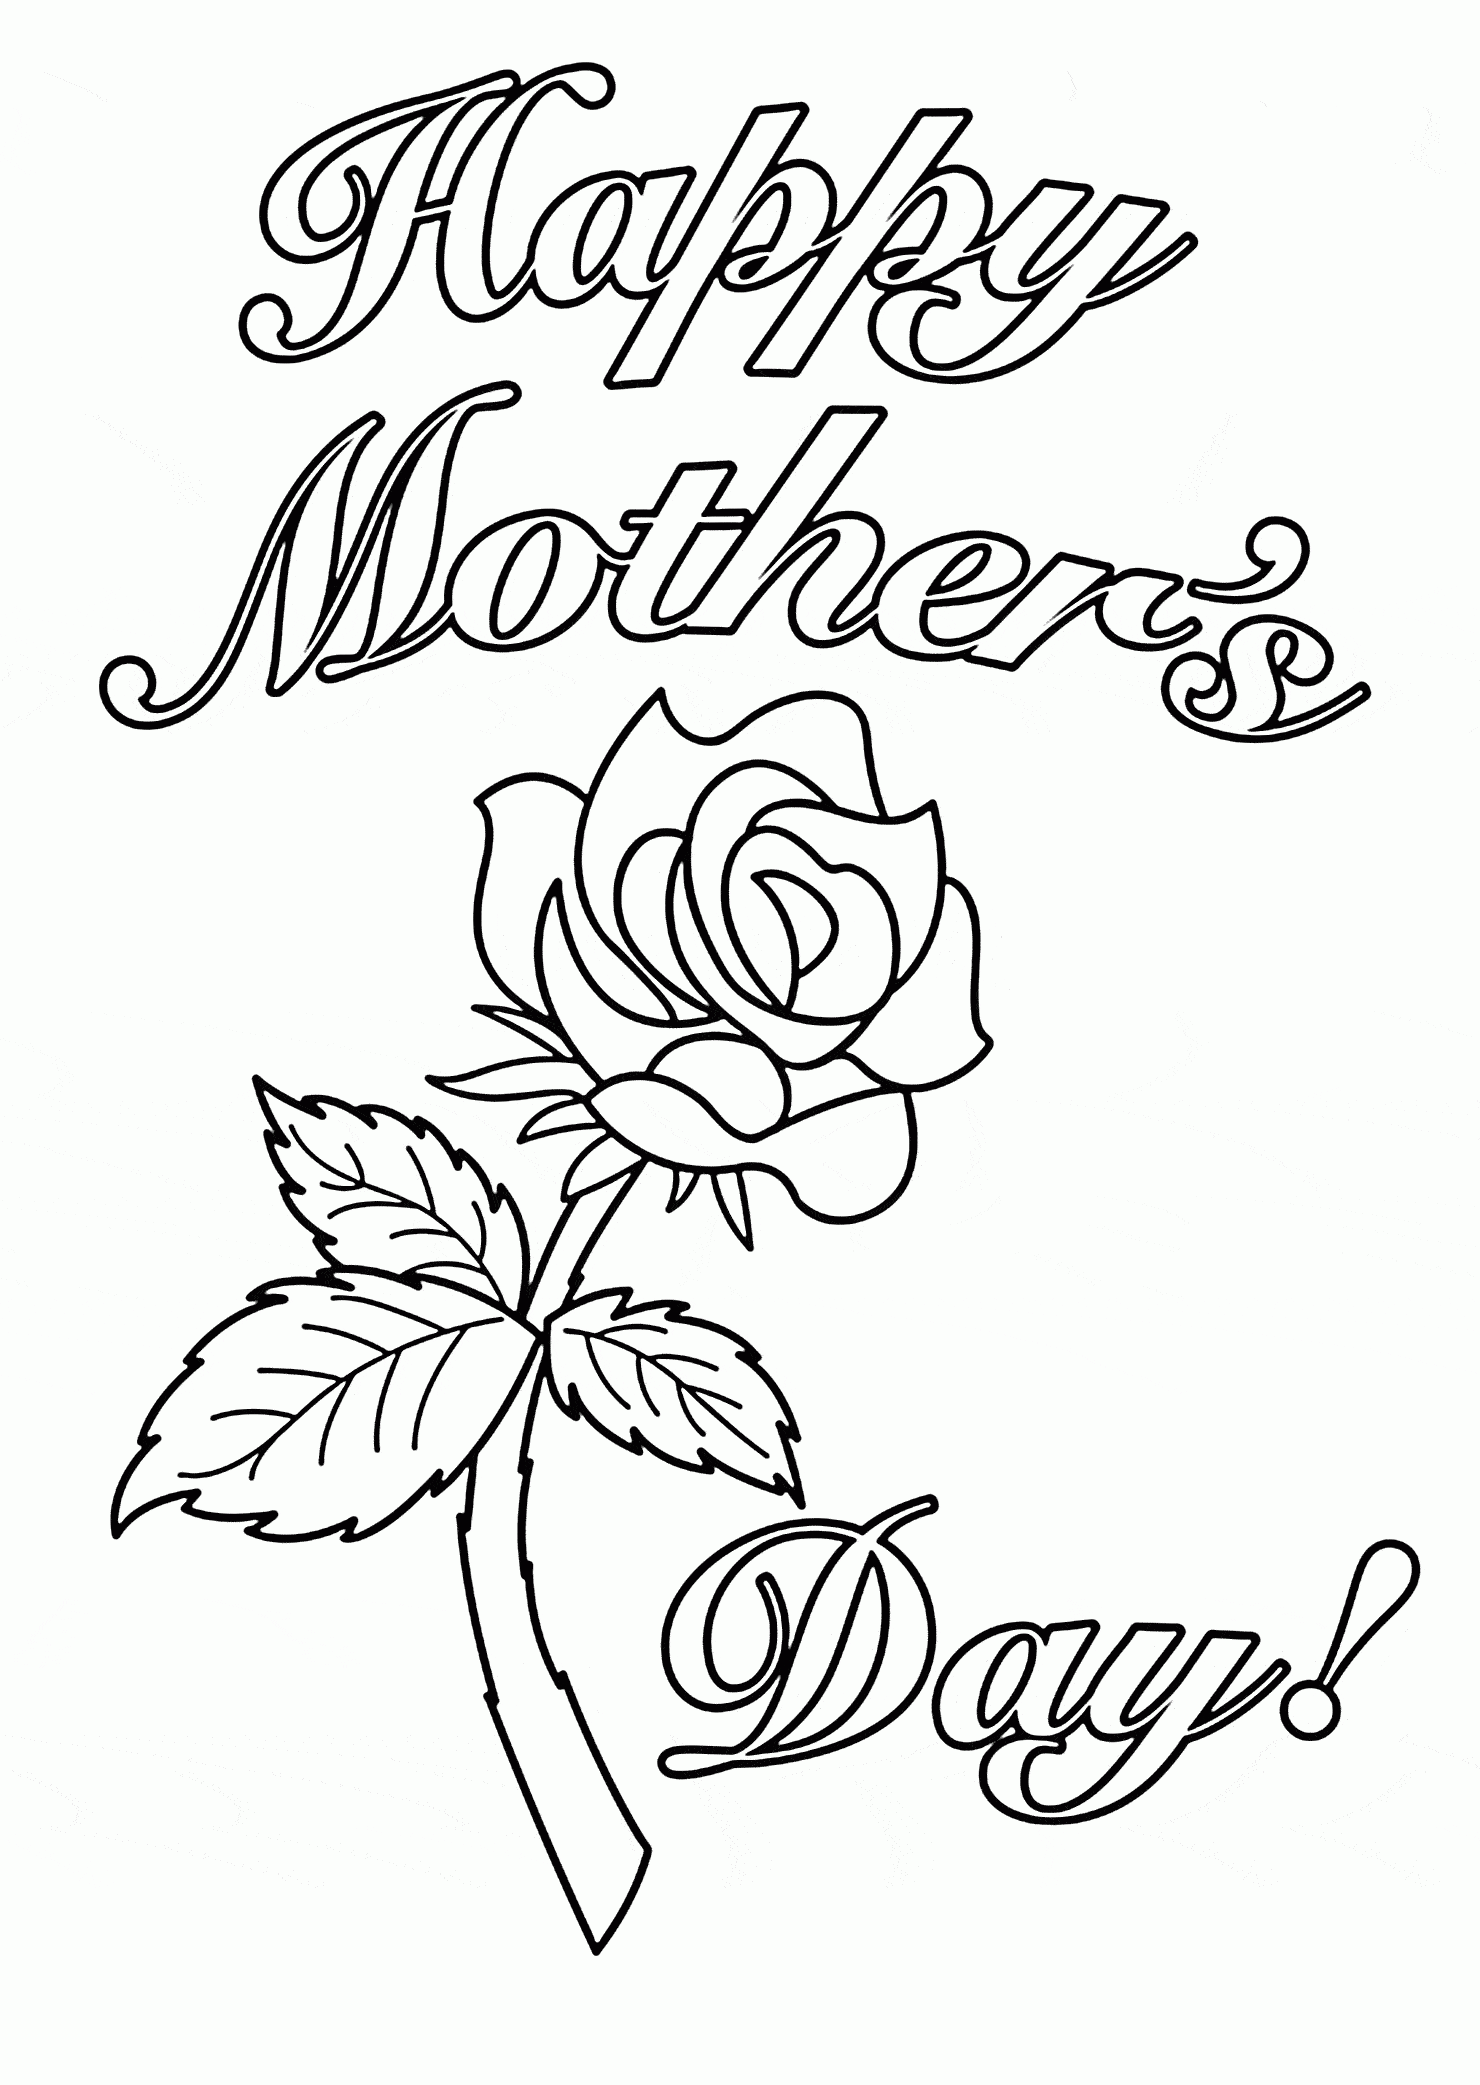 happy-mother-s-day-doodle-coloring-page-free-printable-coloring-pages